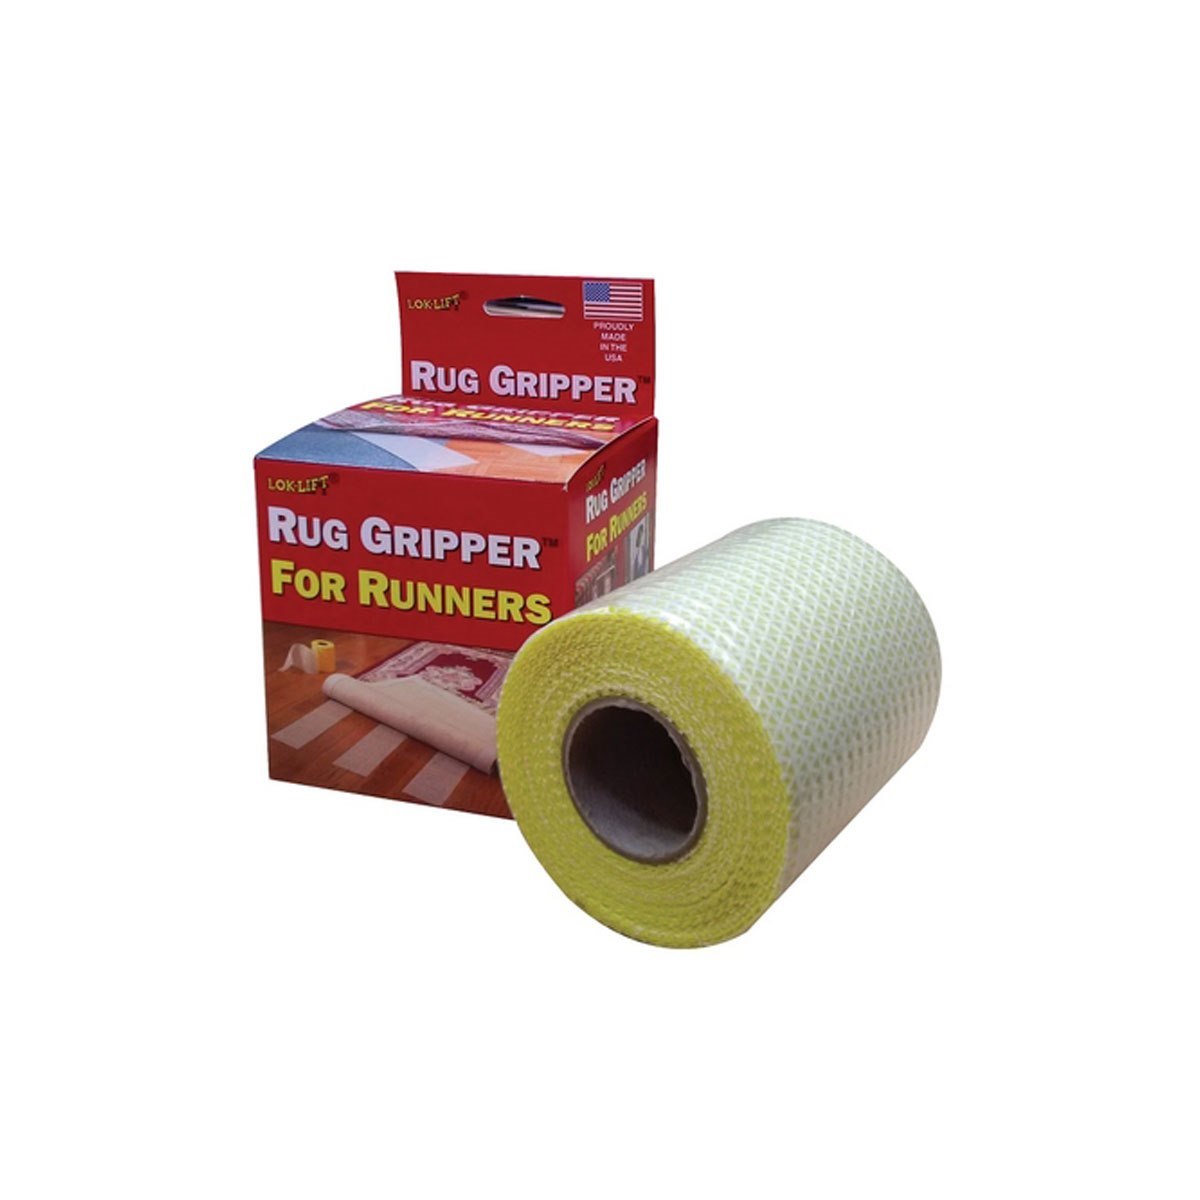 Lok Lift Rug Gripper Tape For Mats and Runners (4in x 25ft)